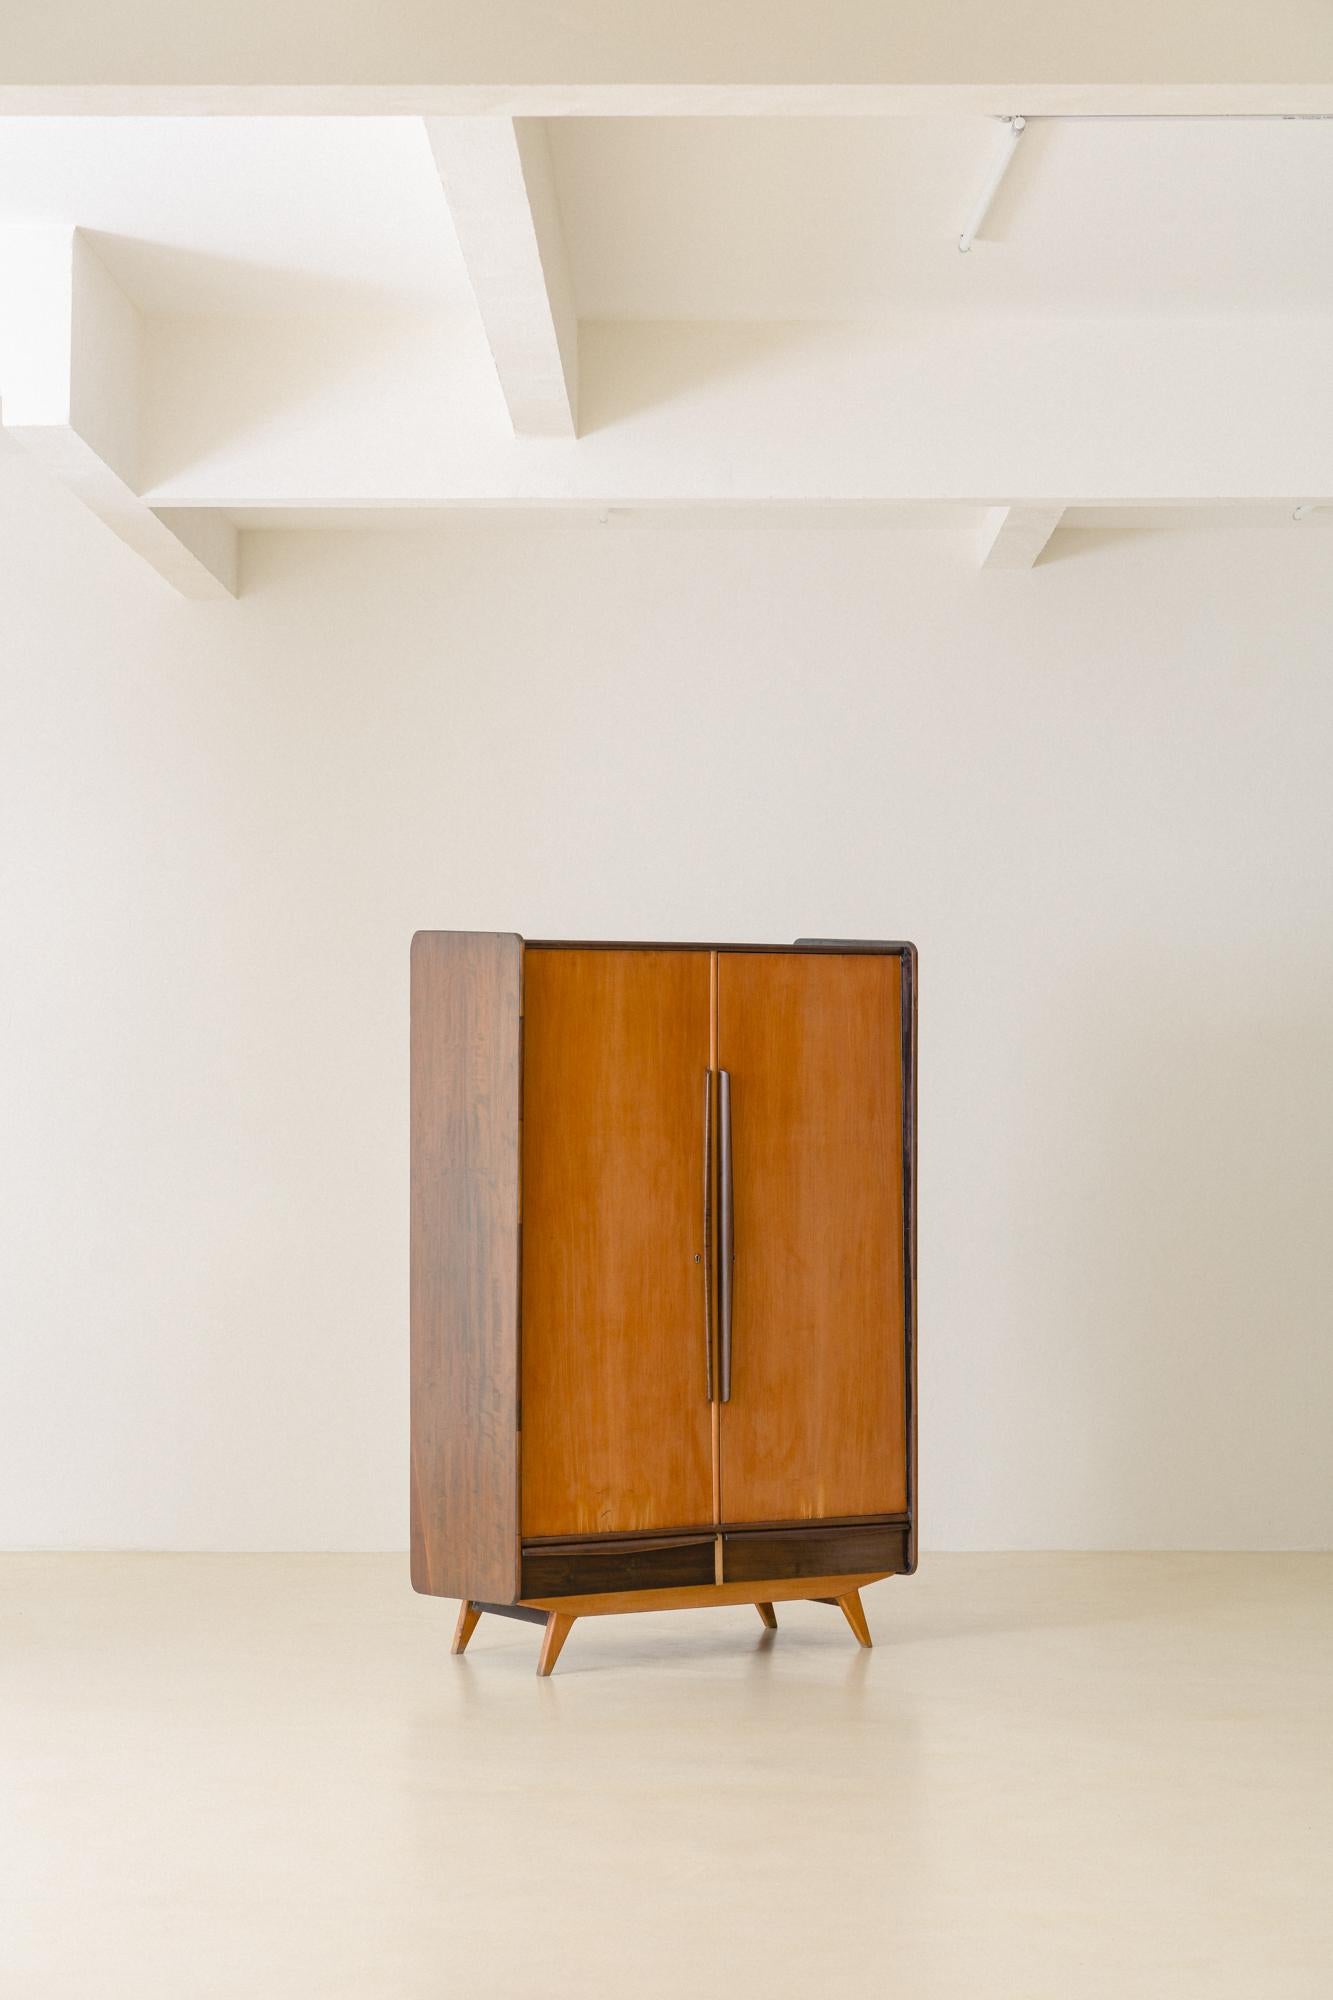 This charming wardrobe belongs to Móveis Cimo's furniture manufactured during the 1960s. The piece is composed of two types of Brazilian wood: the doors and feet are made of golden Caviuna, and the sides, drawers, and handlers are made of a dark